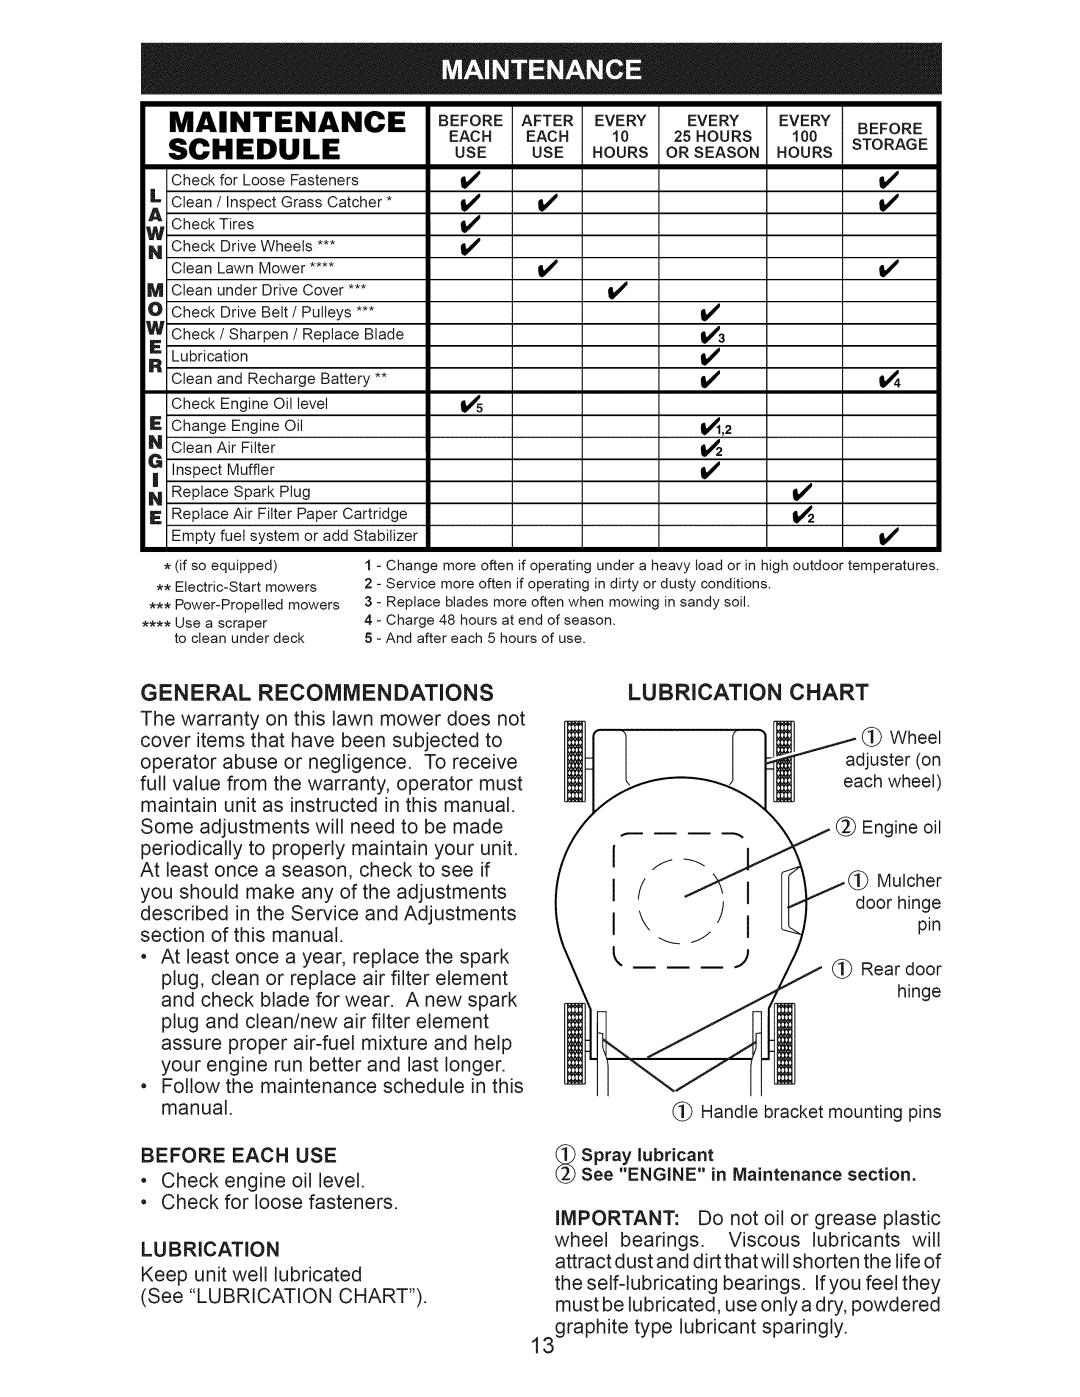 Craftsman 917.374060 owner manual Maintenance, Schedule, Use Hours 